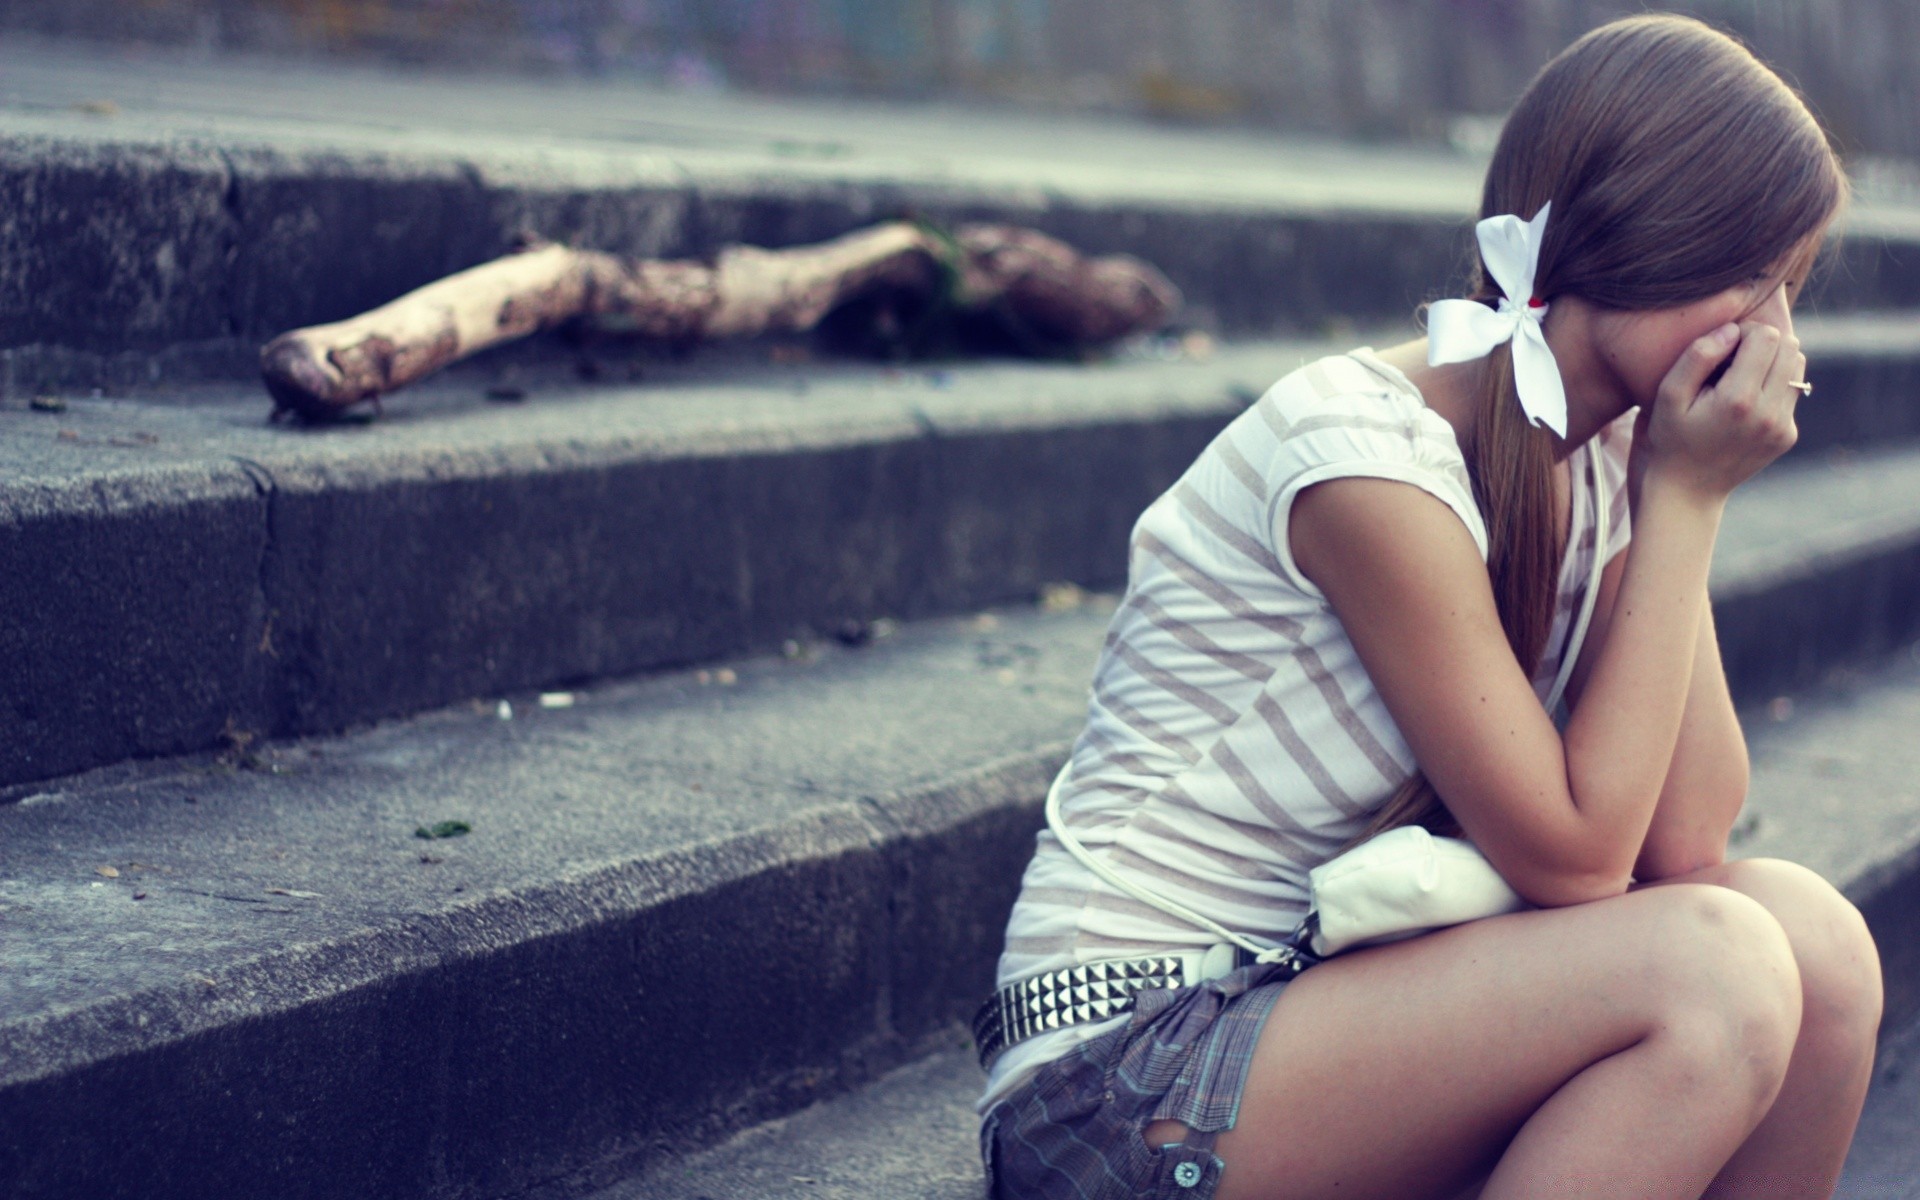 The Other Girls Girl Child Portrait Outdoors Woman - Teenager Being Sad - HD Wallpaper 